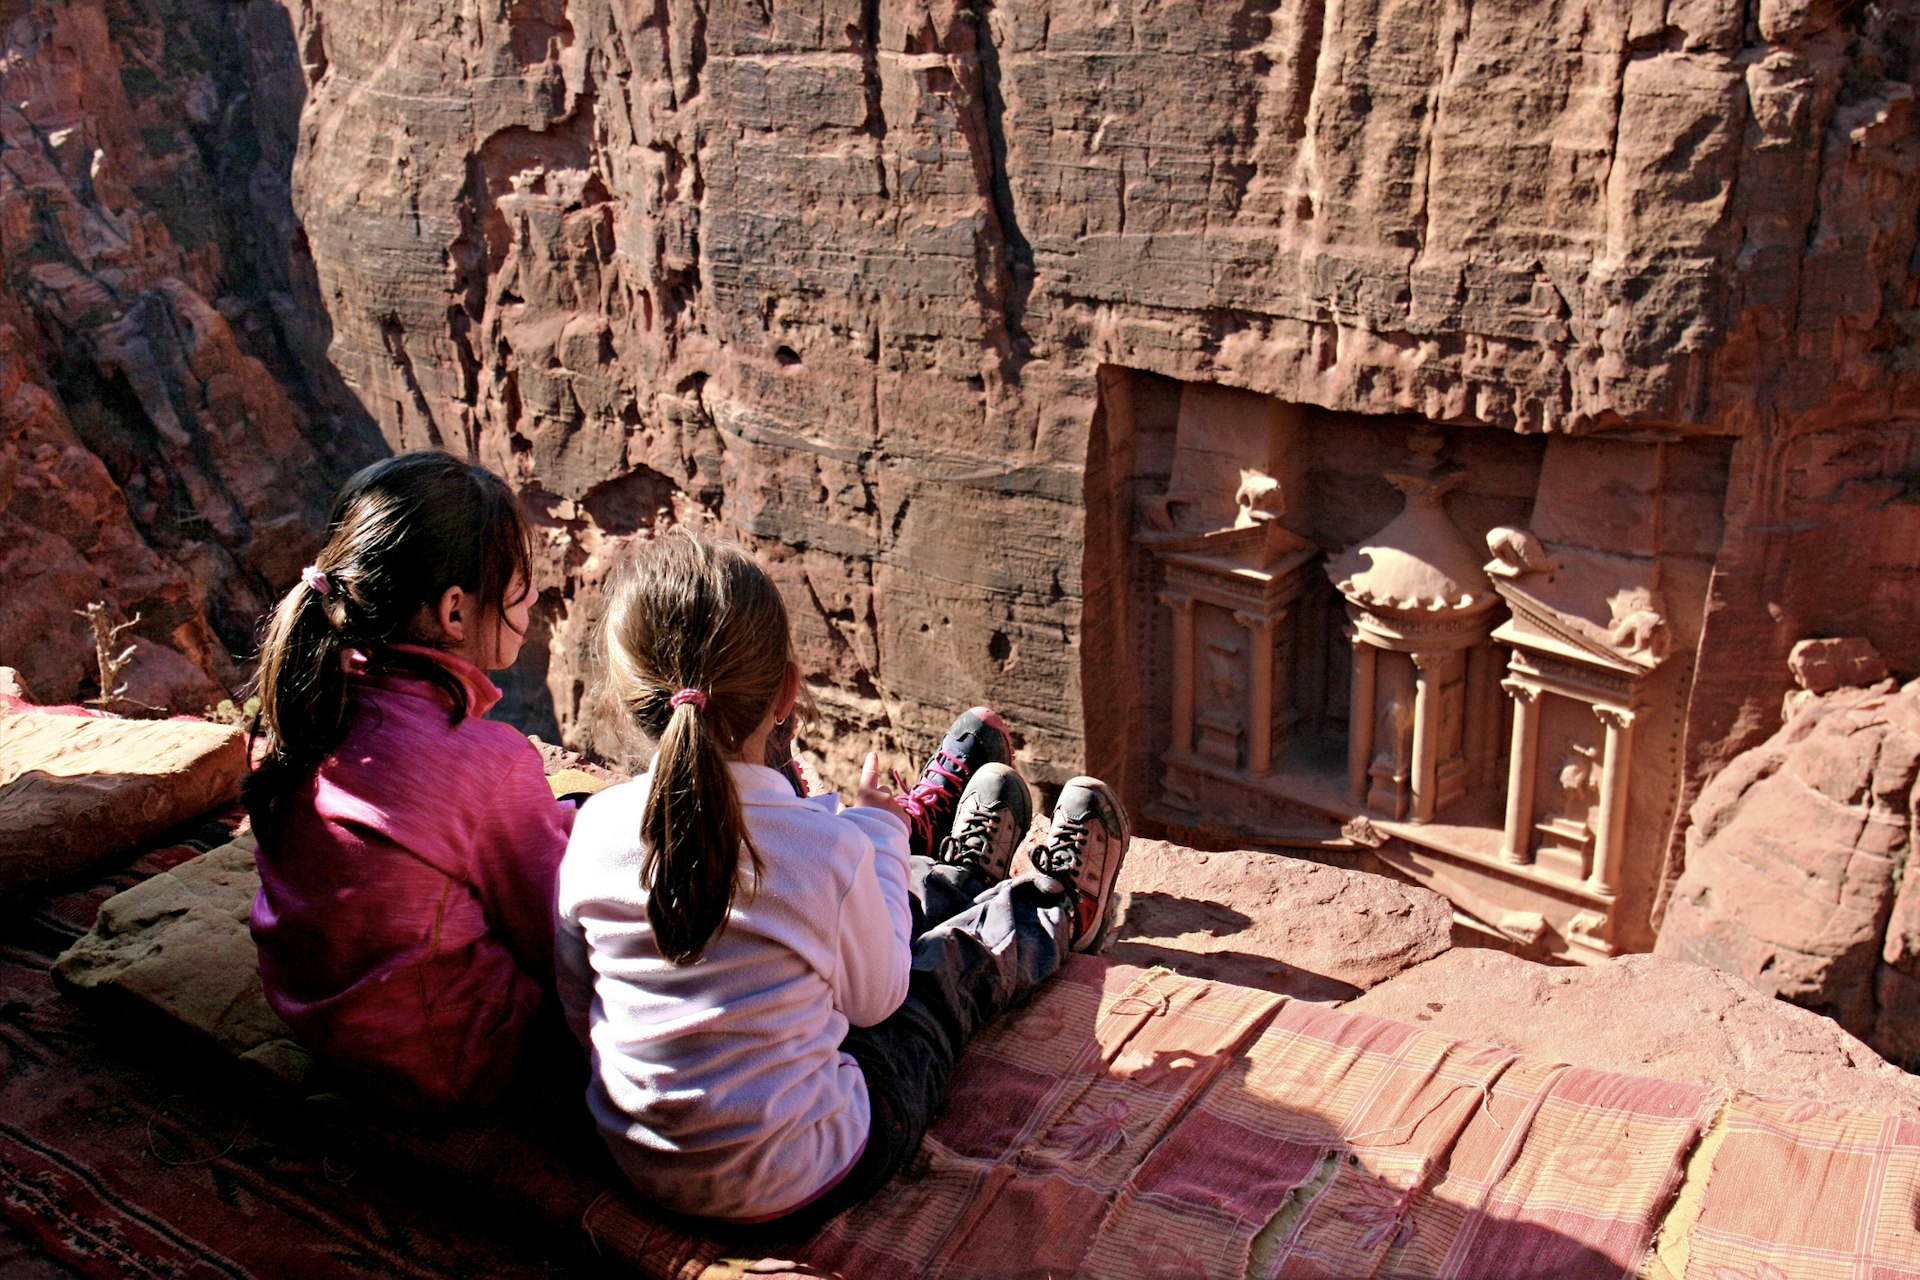 Two young girls sit on a cliff looking downwards into a valley where an ancient city of Petra is carved into the red stone